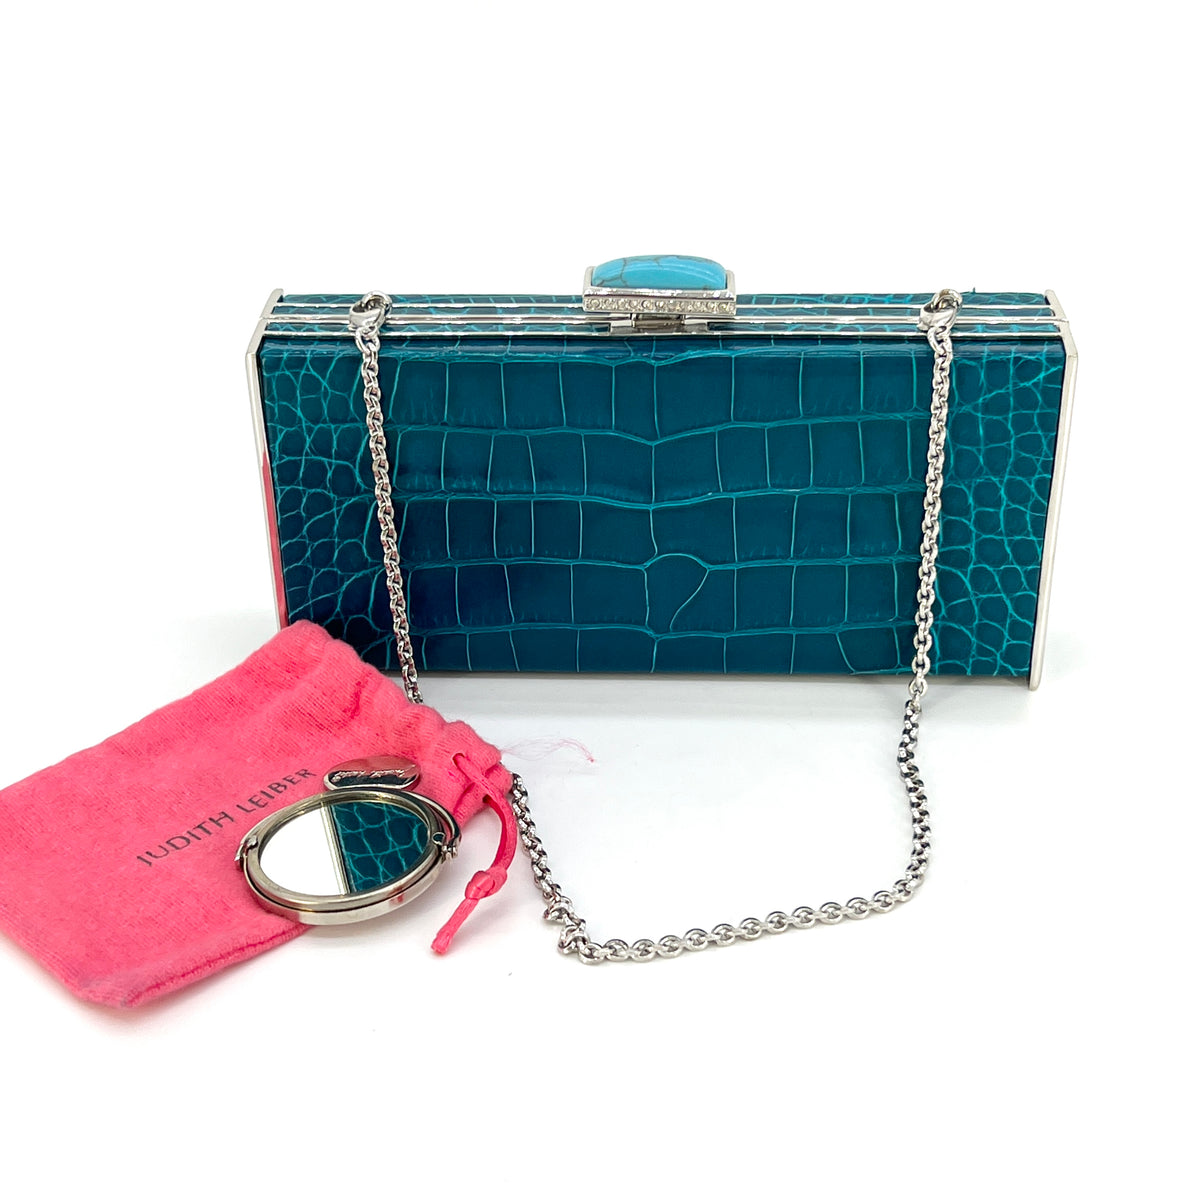 Judith Leiber Minaudiere Small Blue [Guaranteed Authentic]